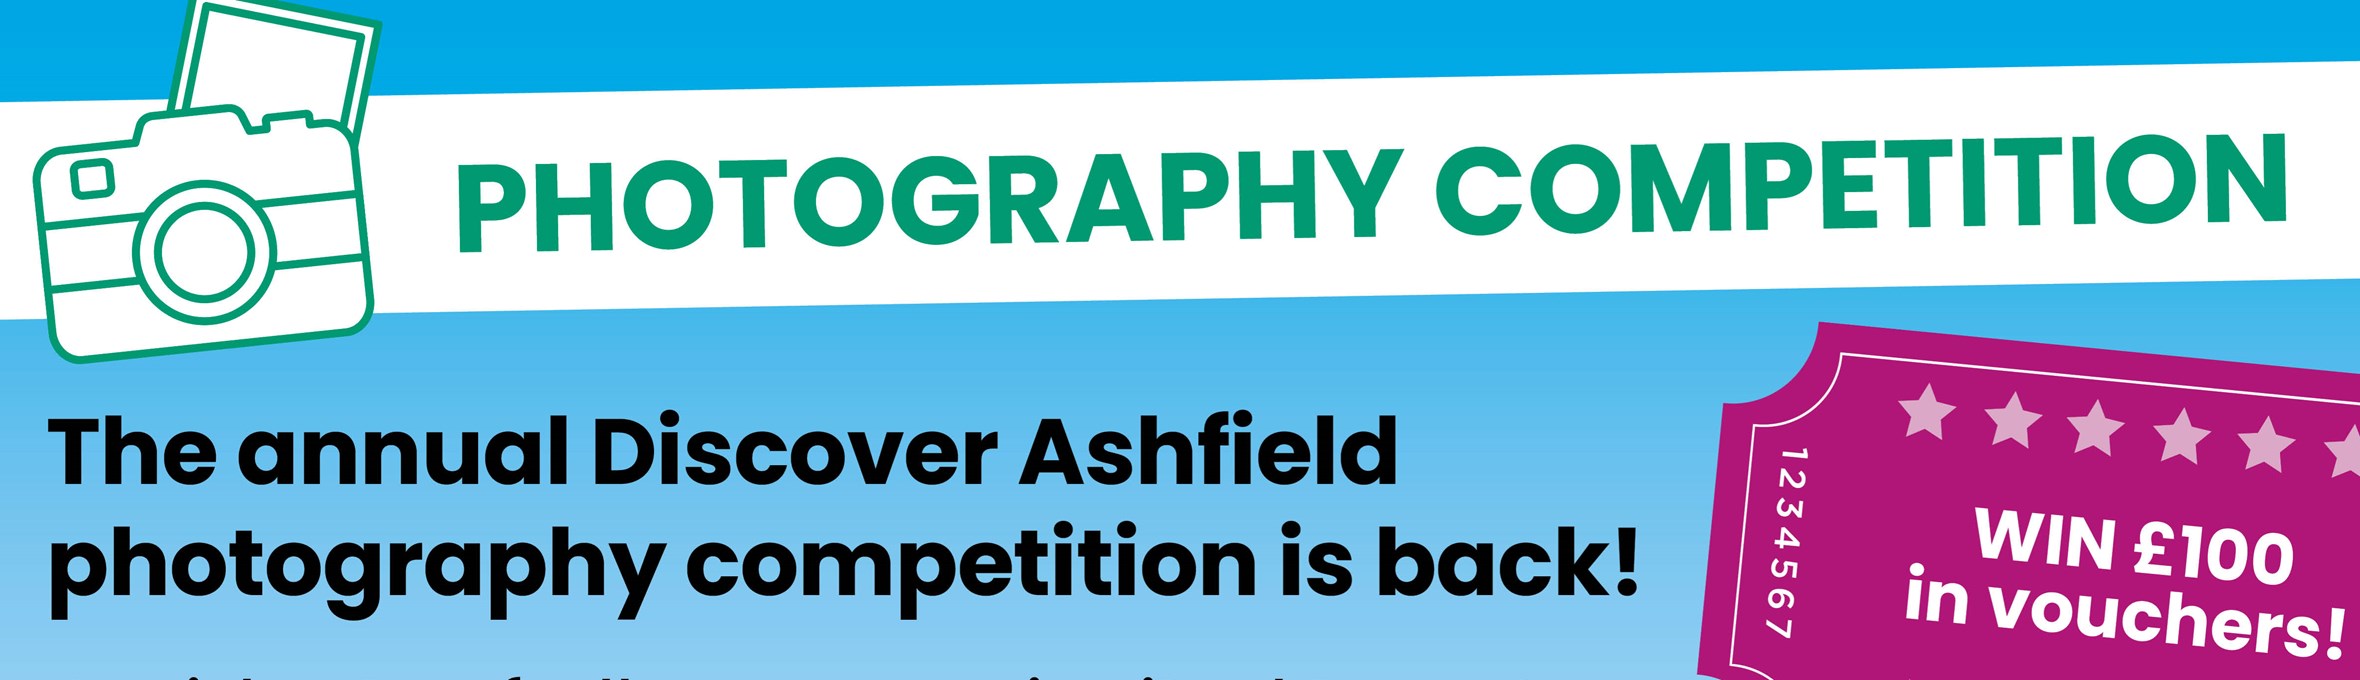 Photography competition - the annual Discover Ashfield photography competition is back.